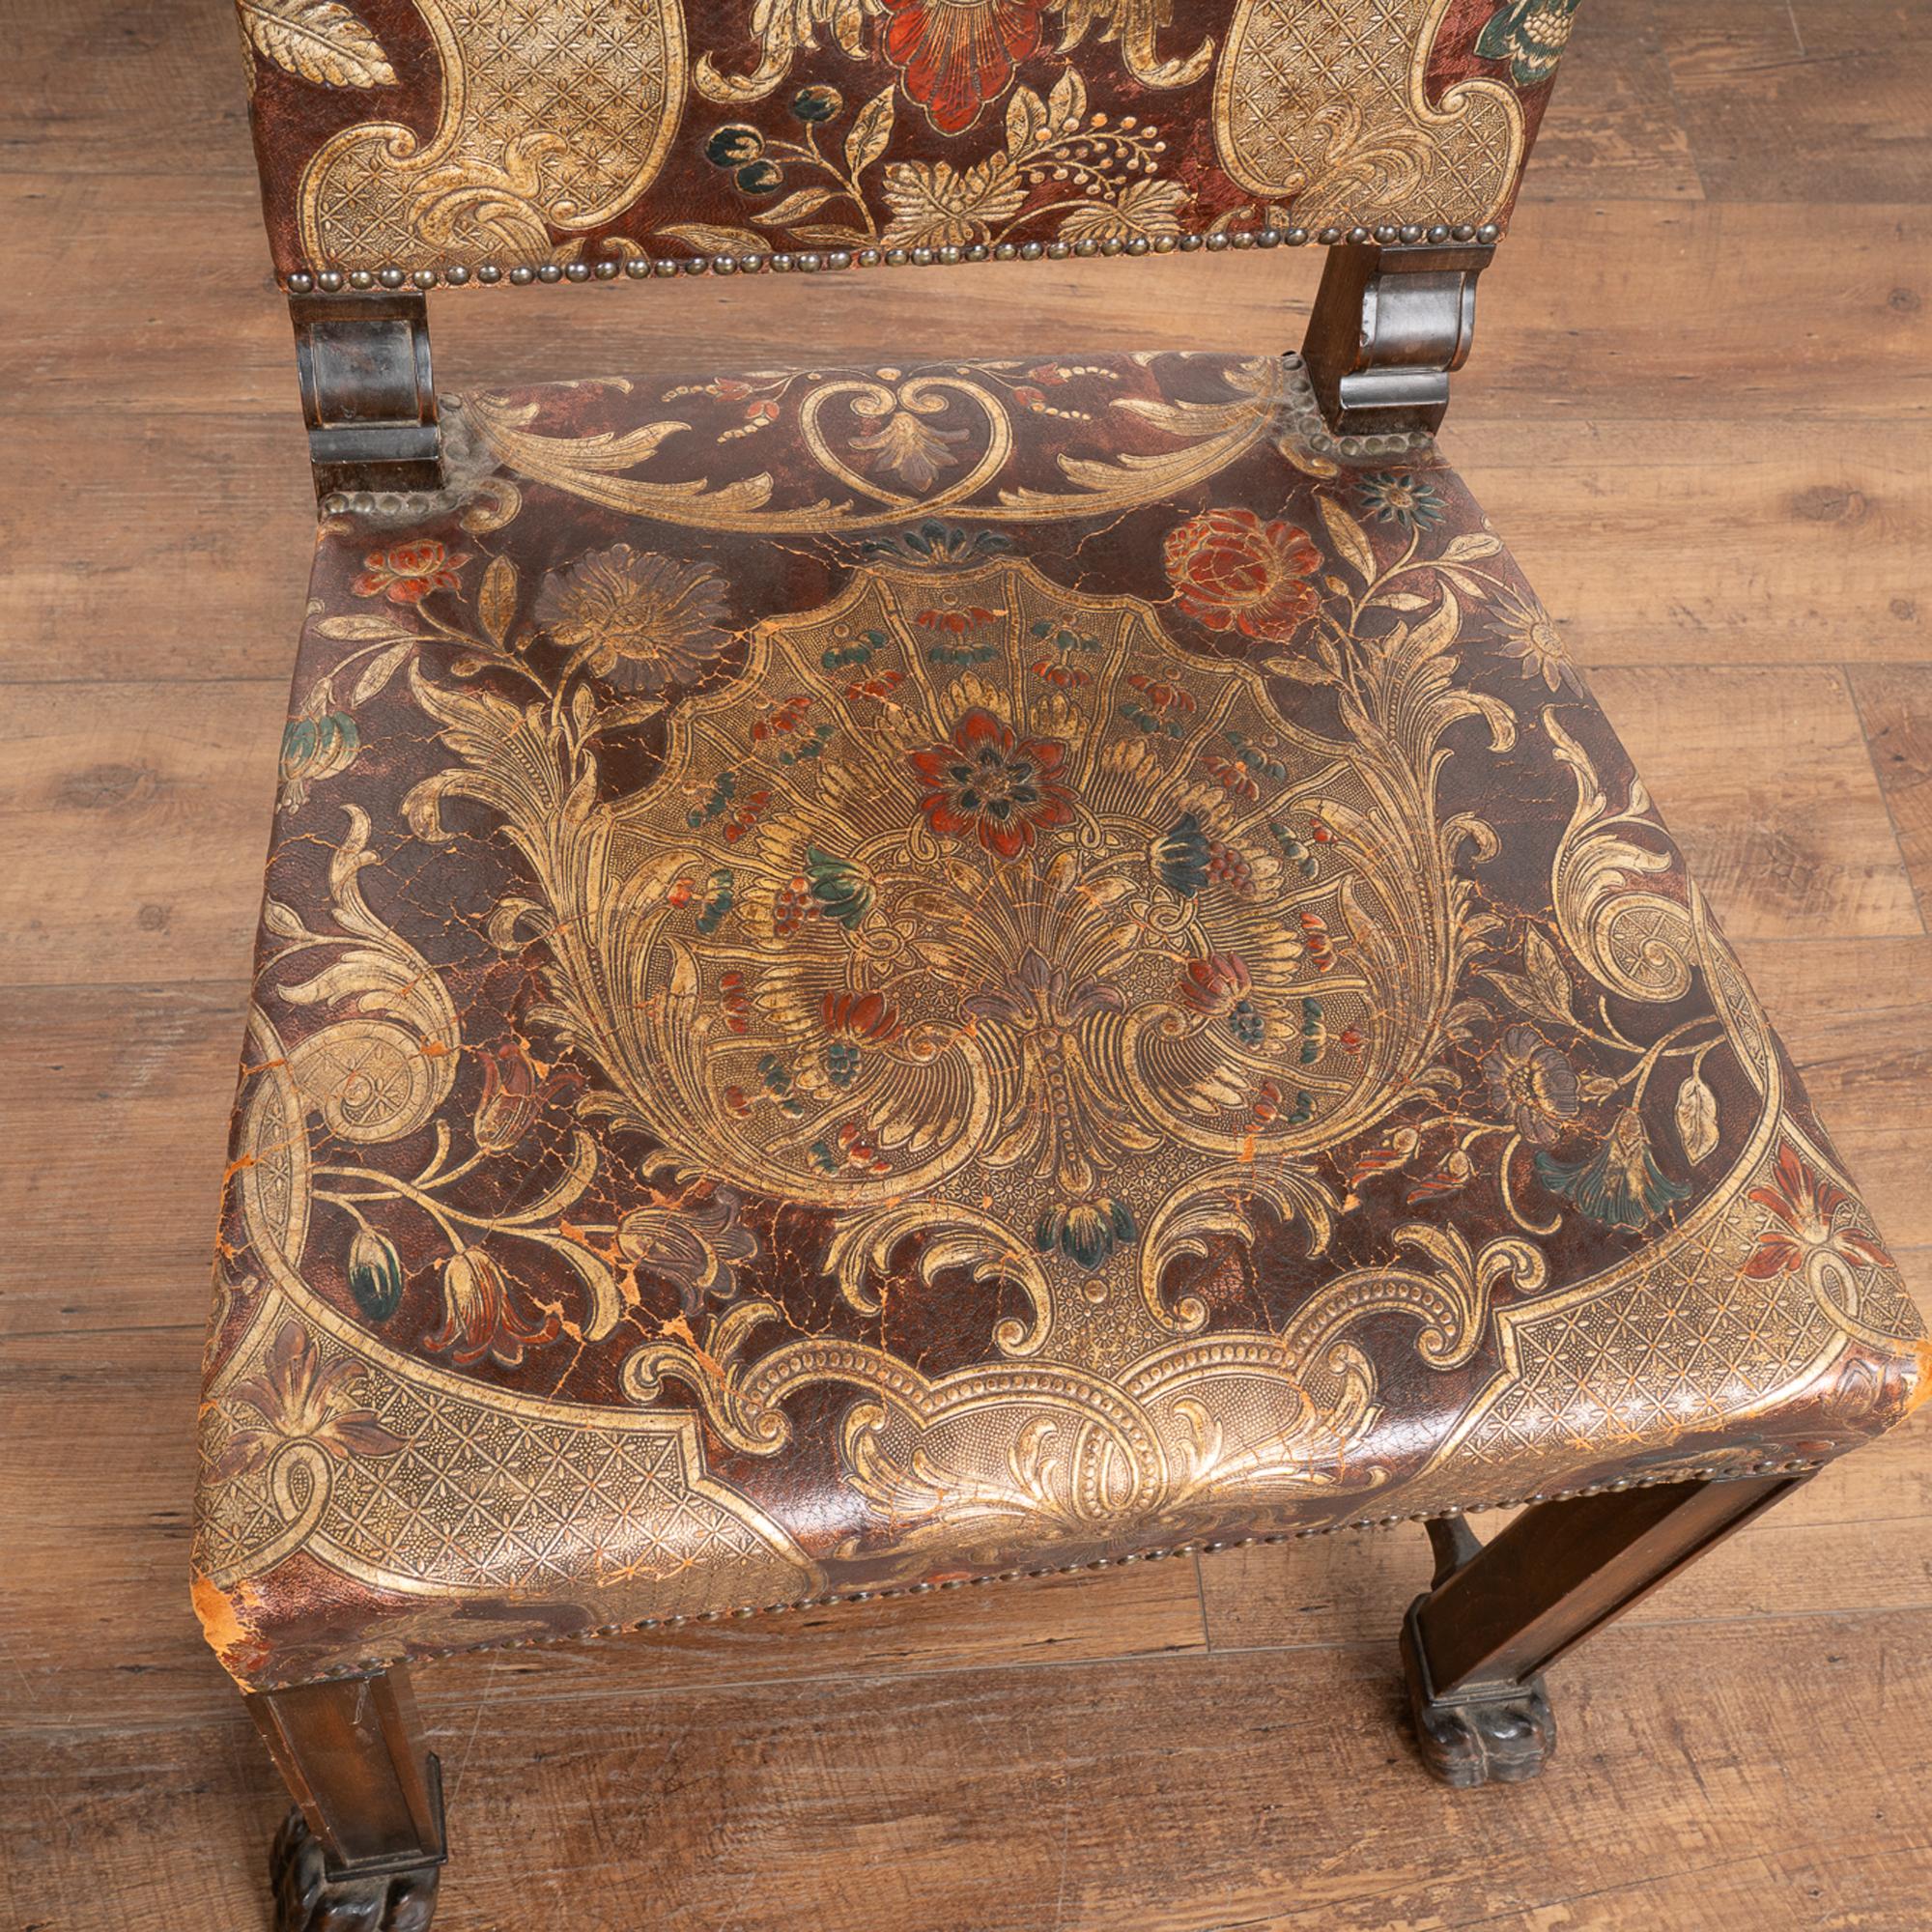 Swedish Set of 10 Embossed and Painted Leather Dining Chairs, Sweden circa 1880